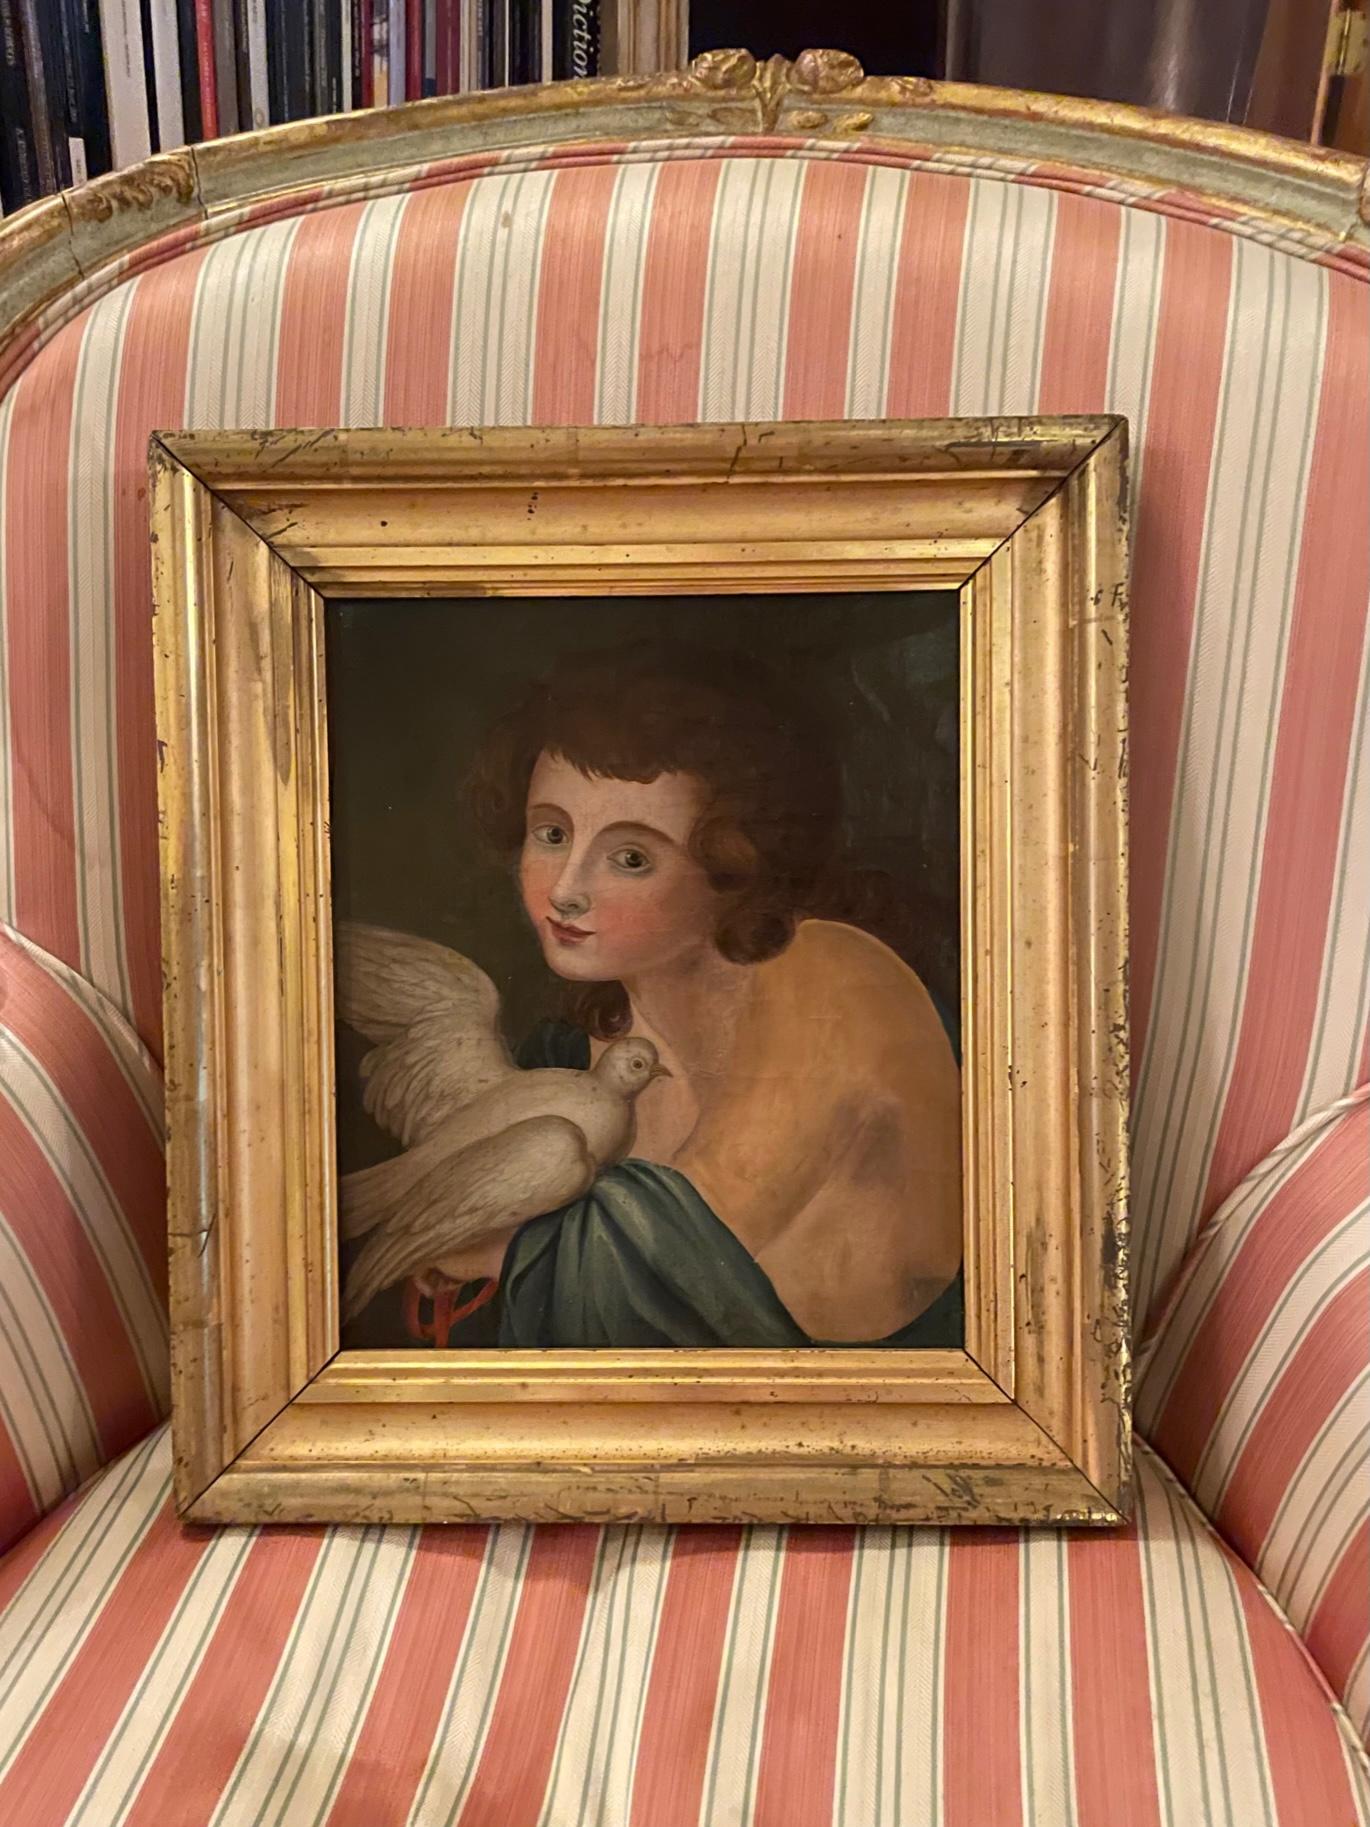 19th century American folk art portrait painting in original period lemon gilt frame.

Beautiful and charming portrait painting in oil on canvas of a little girl holding a dove to her chest. Although painted with great artistry, it maintains the